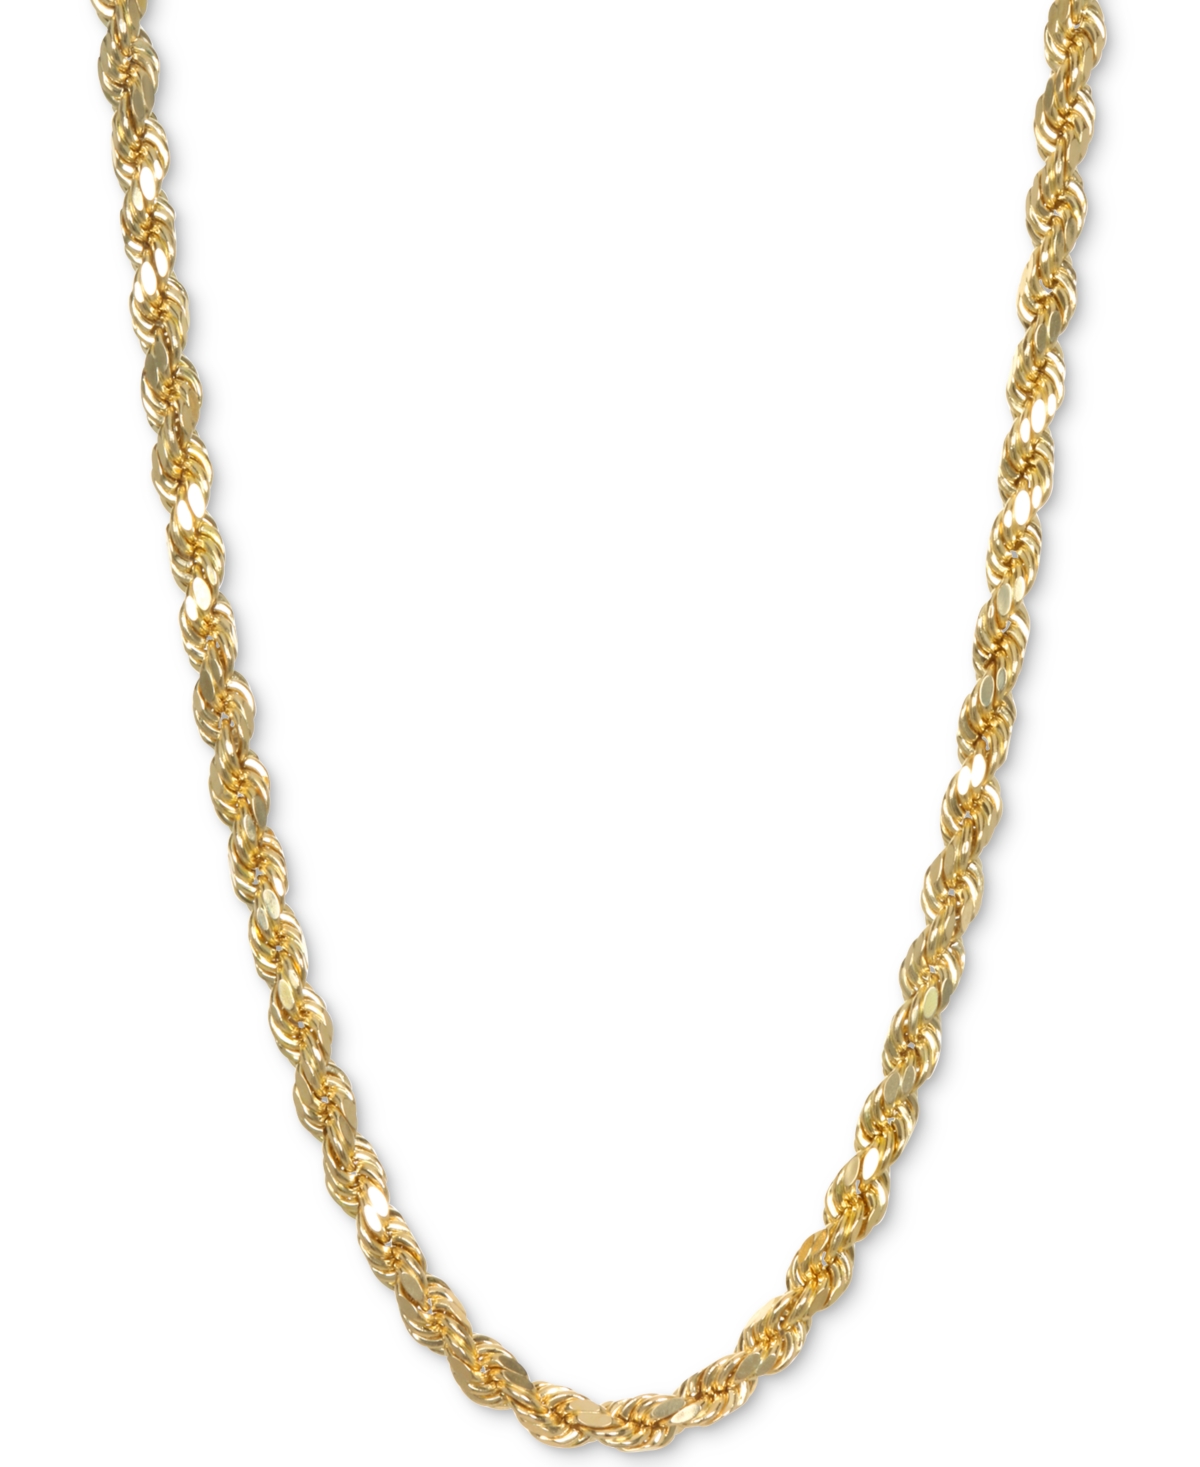 30" Rope Chain Necklace in 14k Gold - Yellow Gold